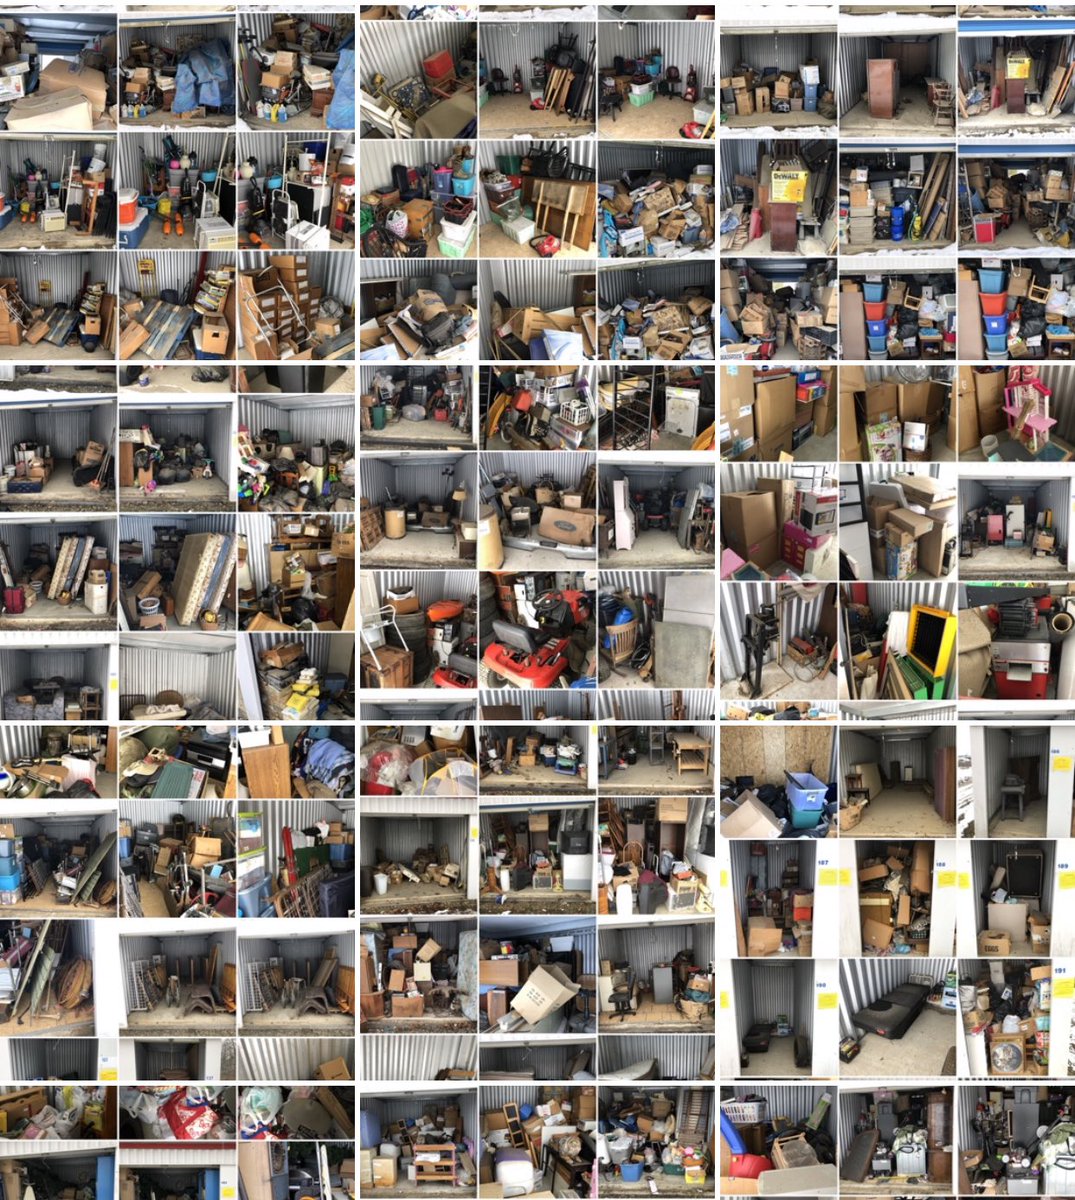 We bought a storage facility at auction in 2019.Only to find 130 of the 185 units had abandoned items inside them because the owner had severe dementia and had lost track of them.We had to try to locate them and organize an auction of every unit. We took on a ton of liability